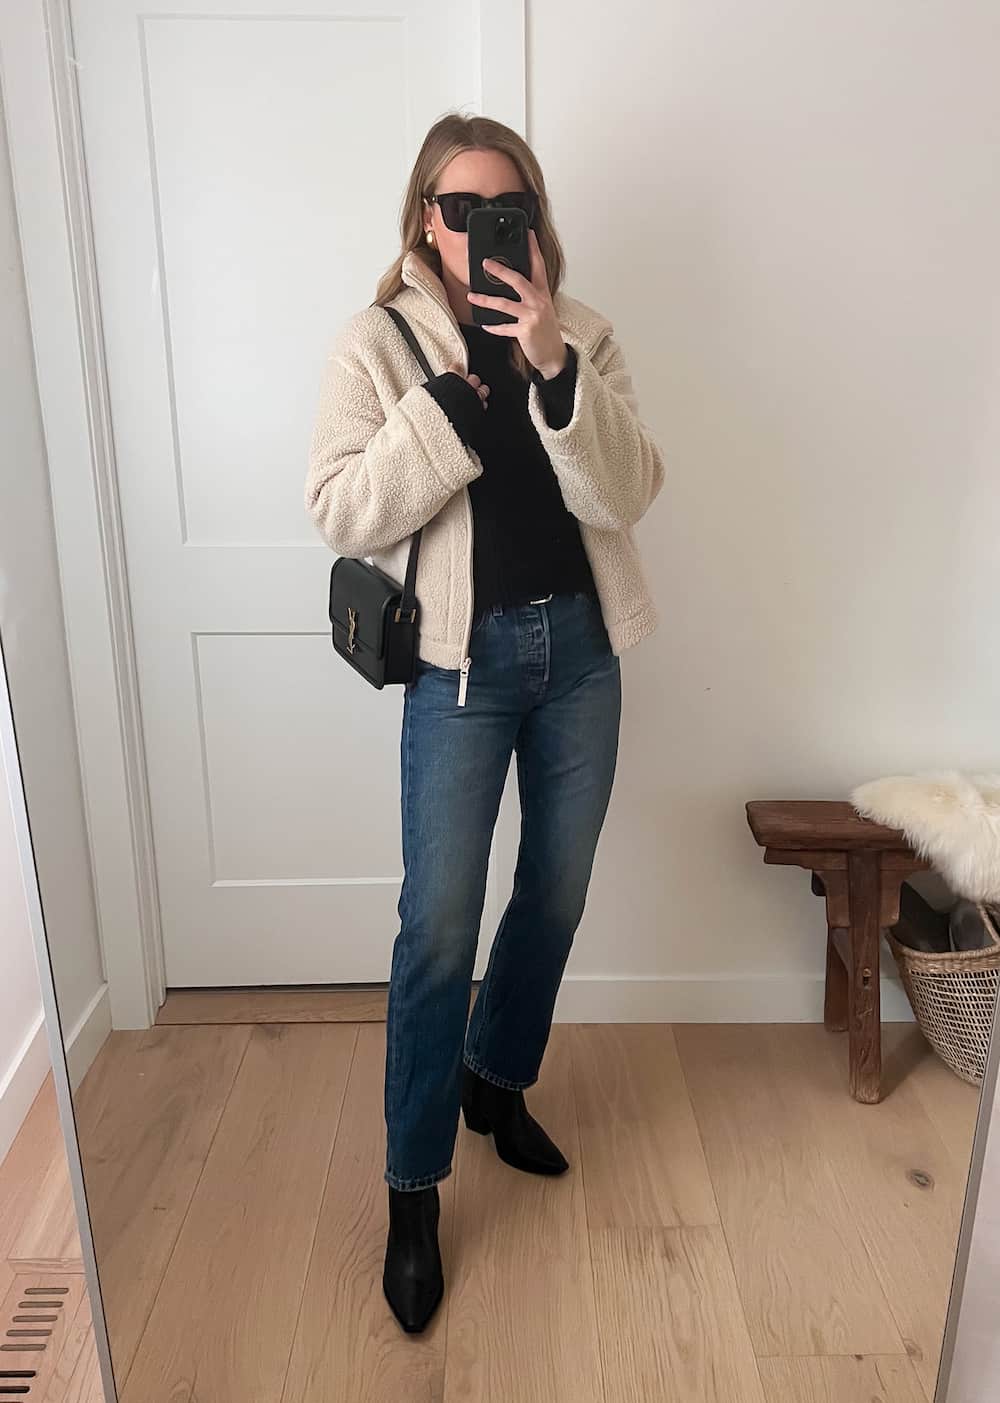 Christal wearing dark denim straight jeans with black booties and a white sherpa jacket.